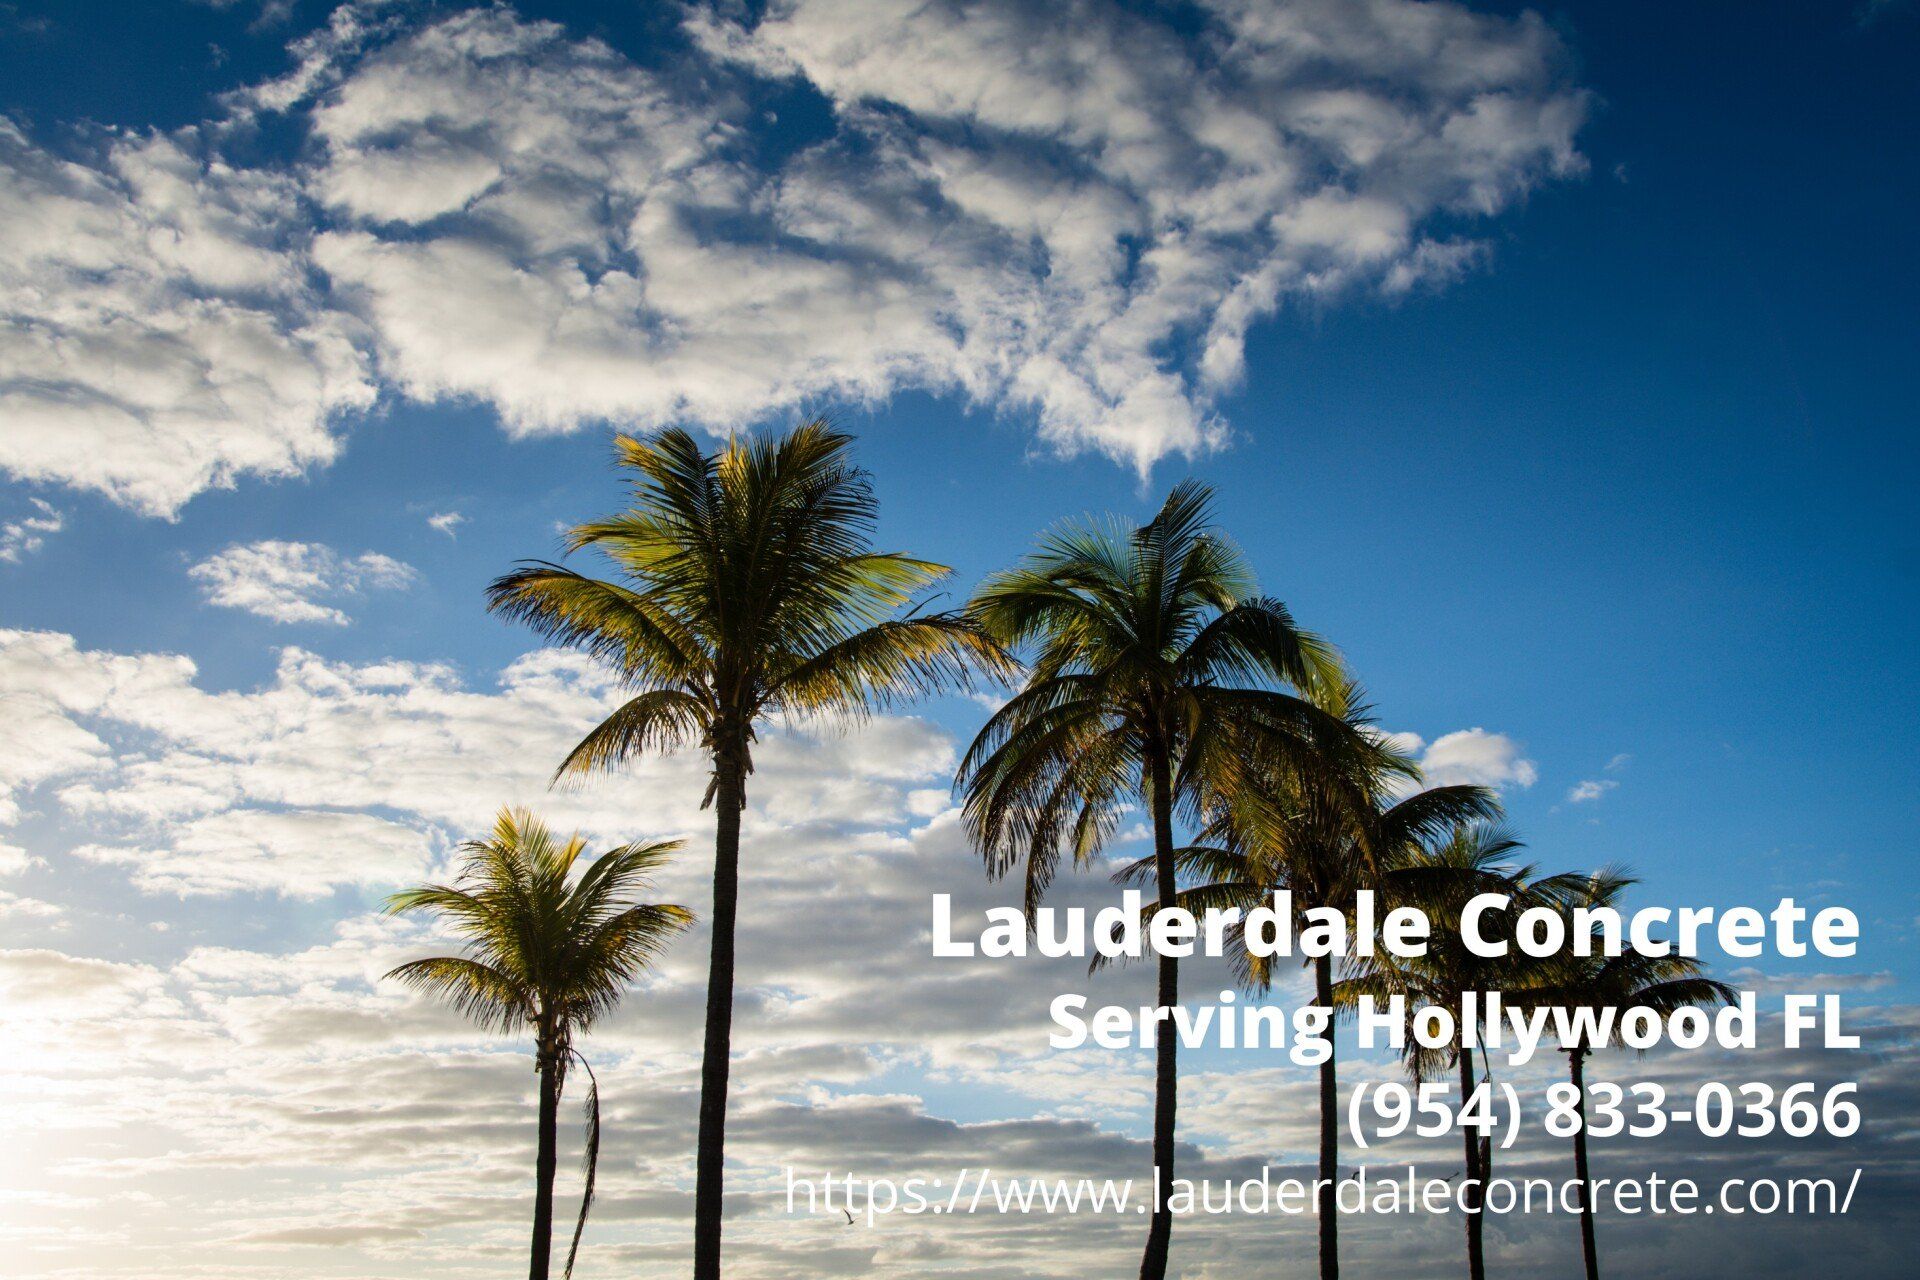 on the background of the business info of Lauderdale Concrete are the picturesque palms in Hollywood FL